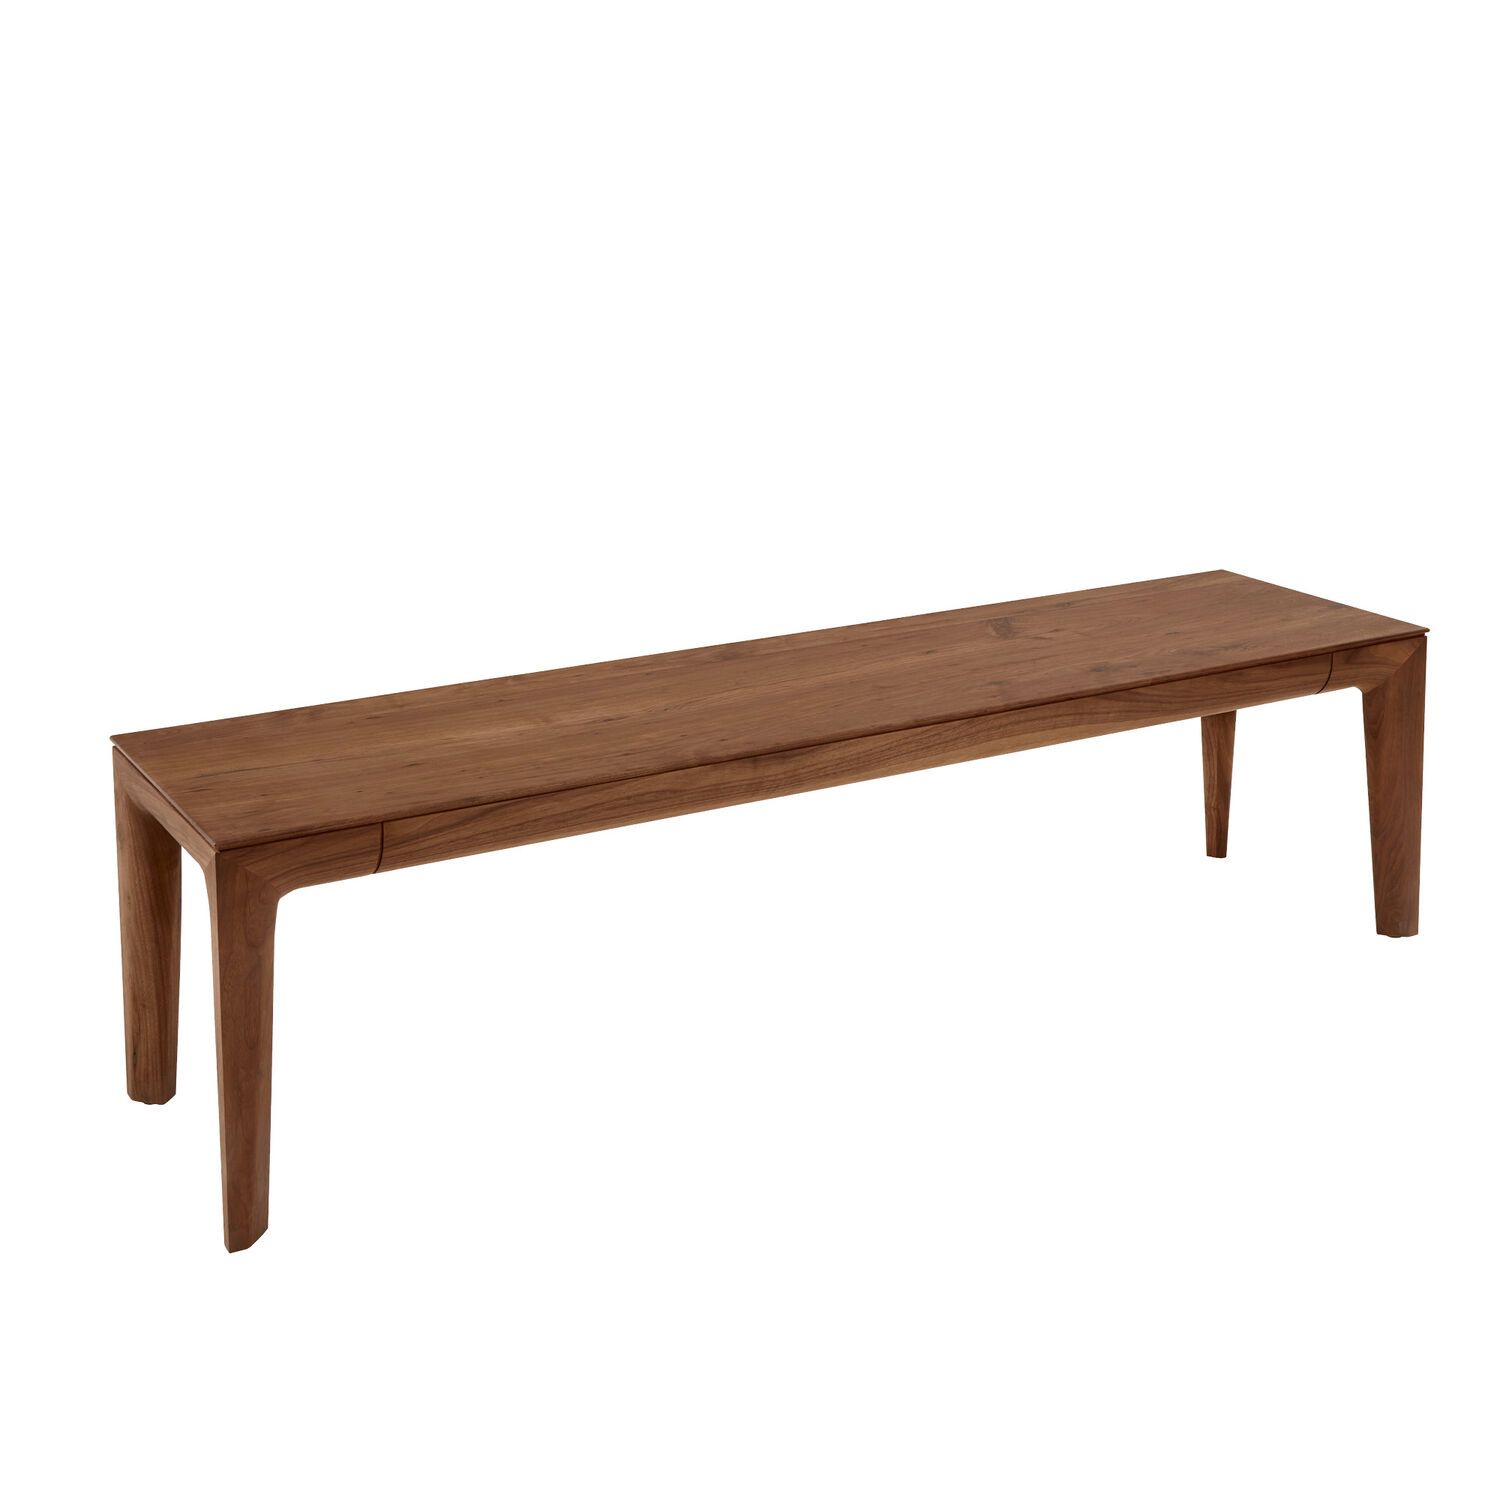 Tavo Seat – Garpa Pertaining To Walnut Solid Wood Garden Benches (View 24 of 25)